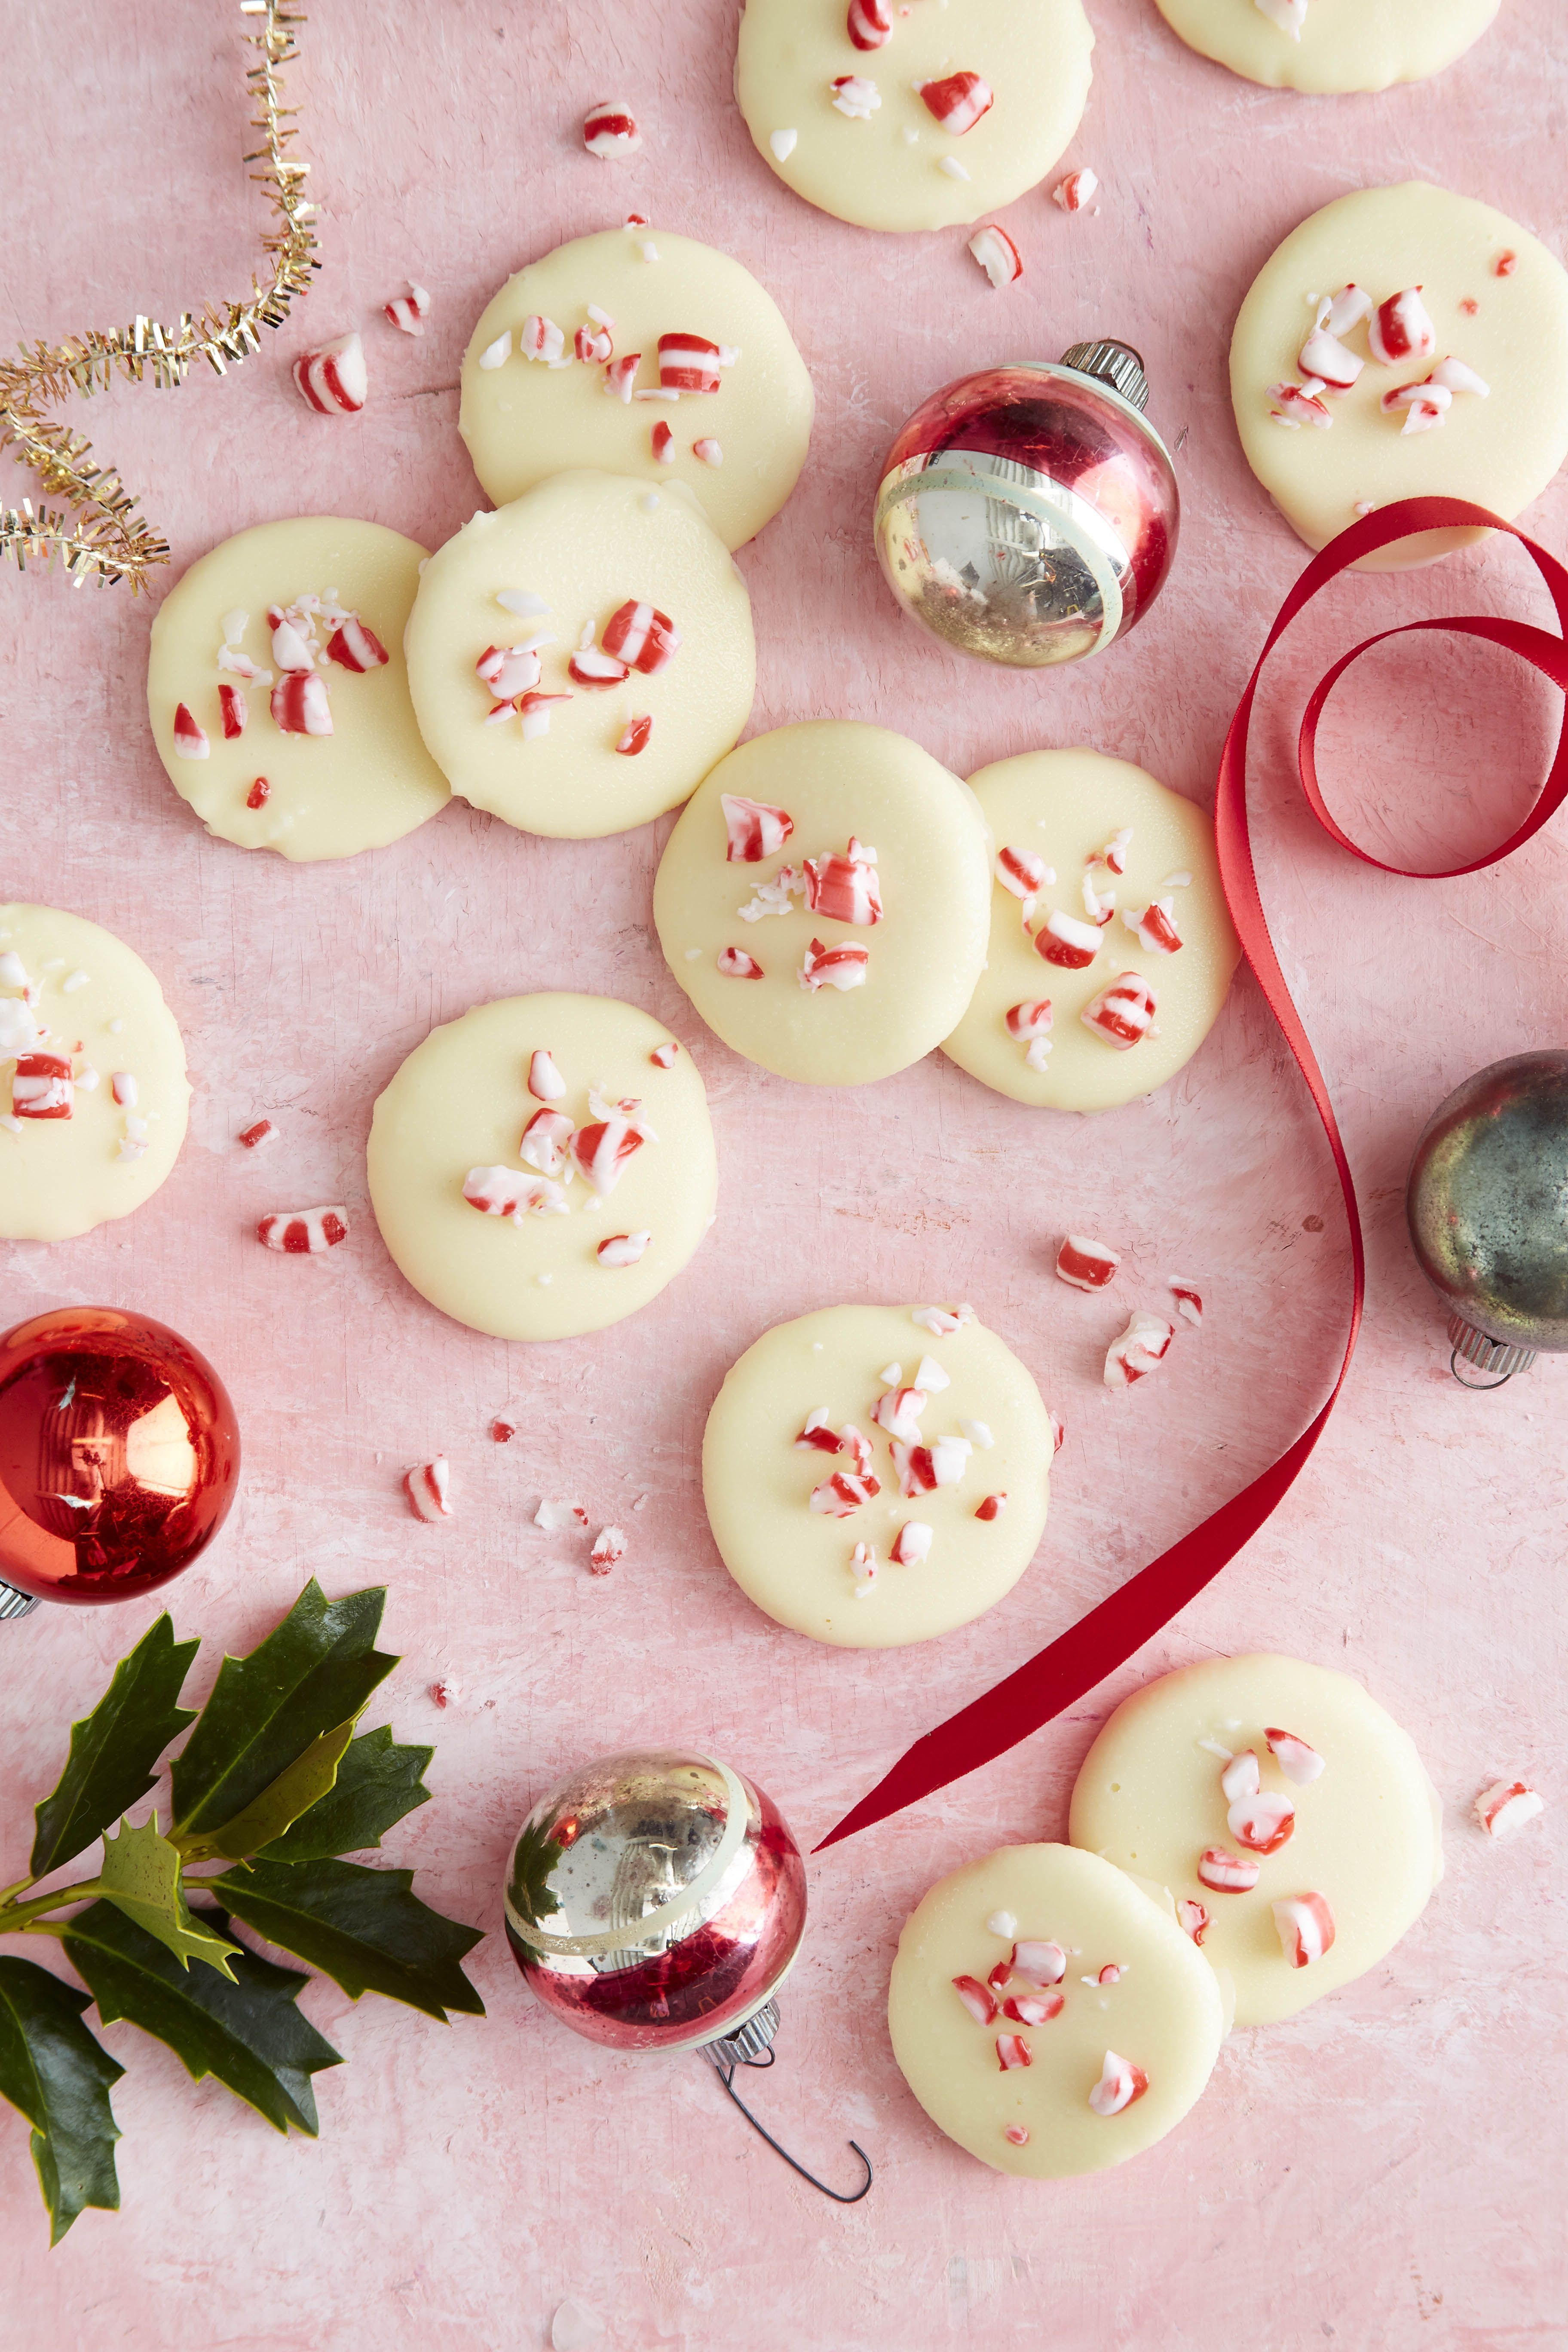 https://hips.hearstapps.com/hmg-prod/images/christmas-food-gifts-white-chocolate-peppermint-patties-1632331856.jpg